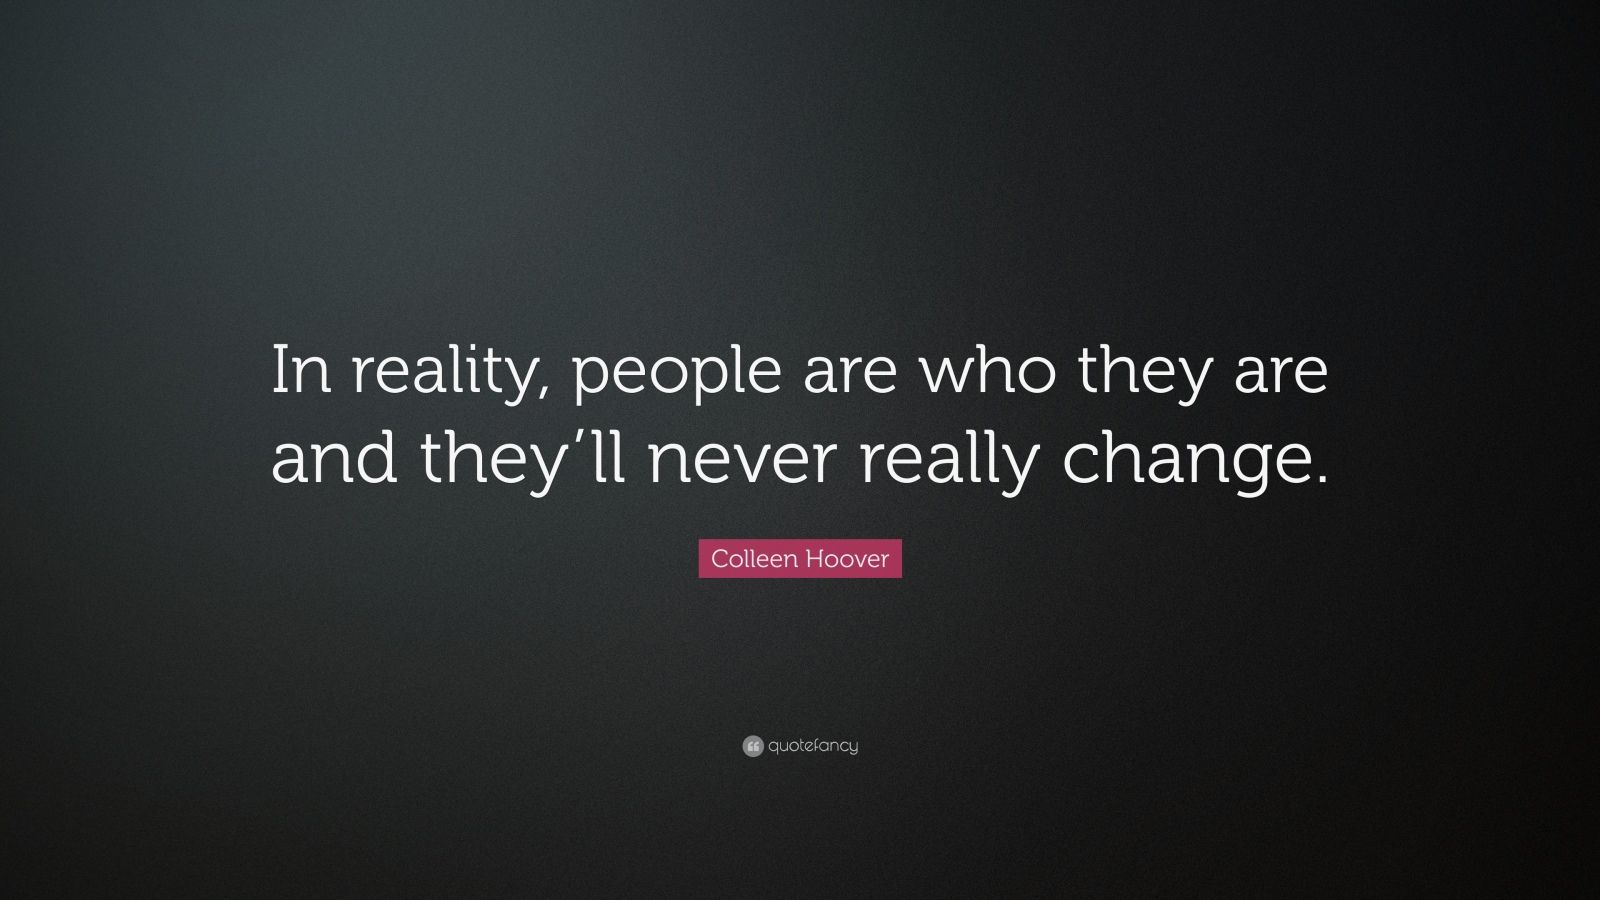 Colleen Hoover Quote: “In reality, people are who they are and they’ll ...